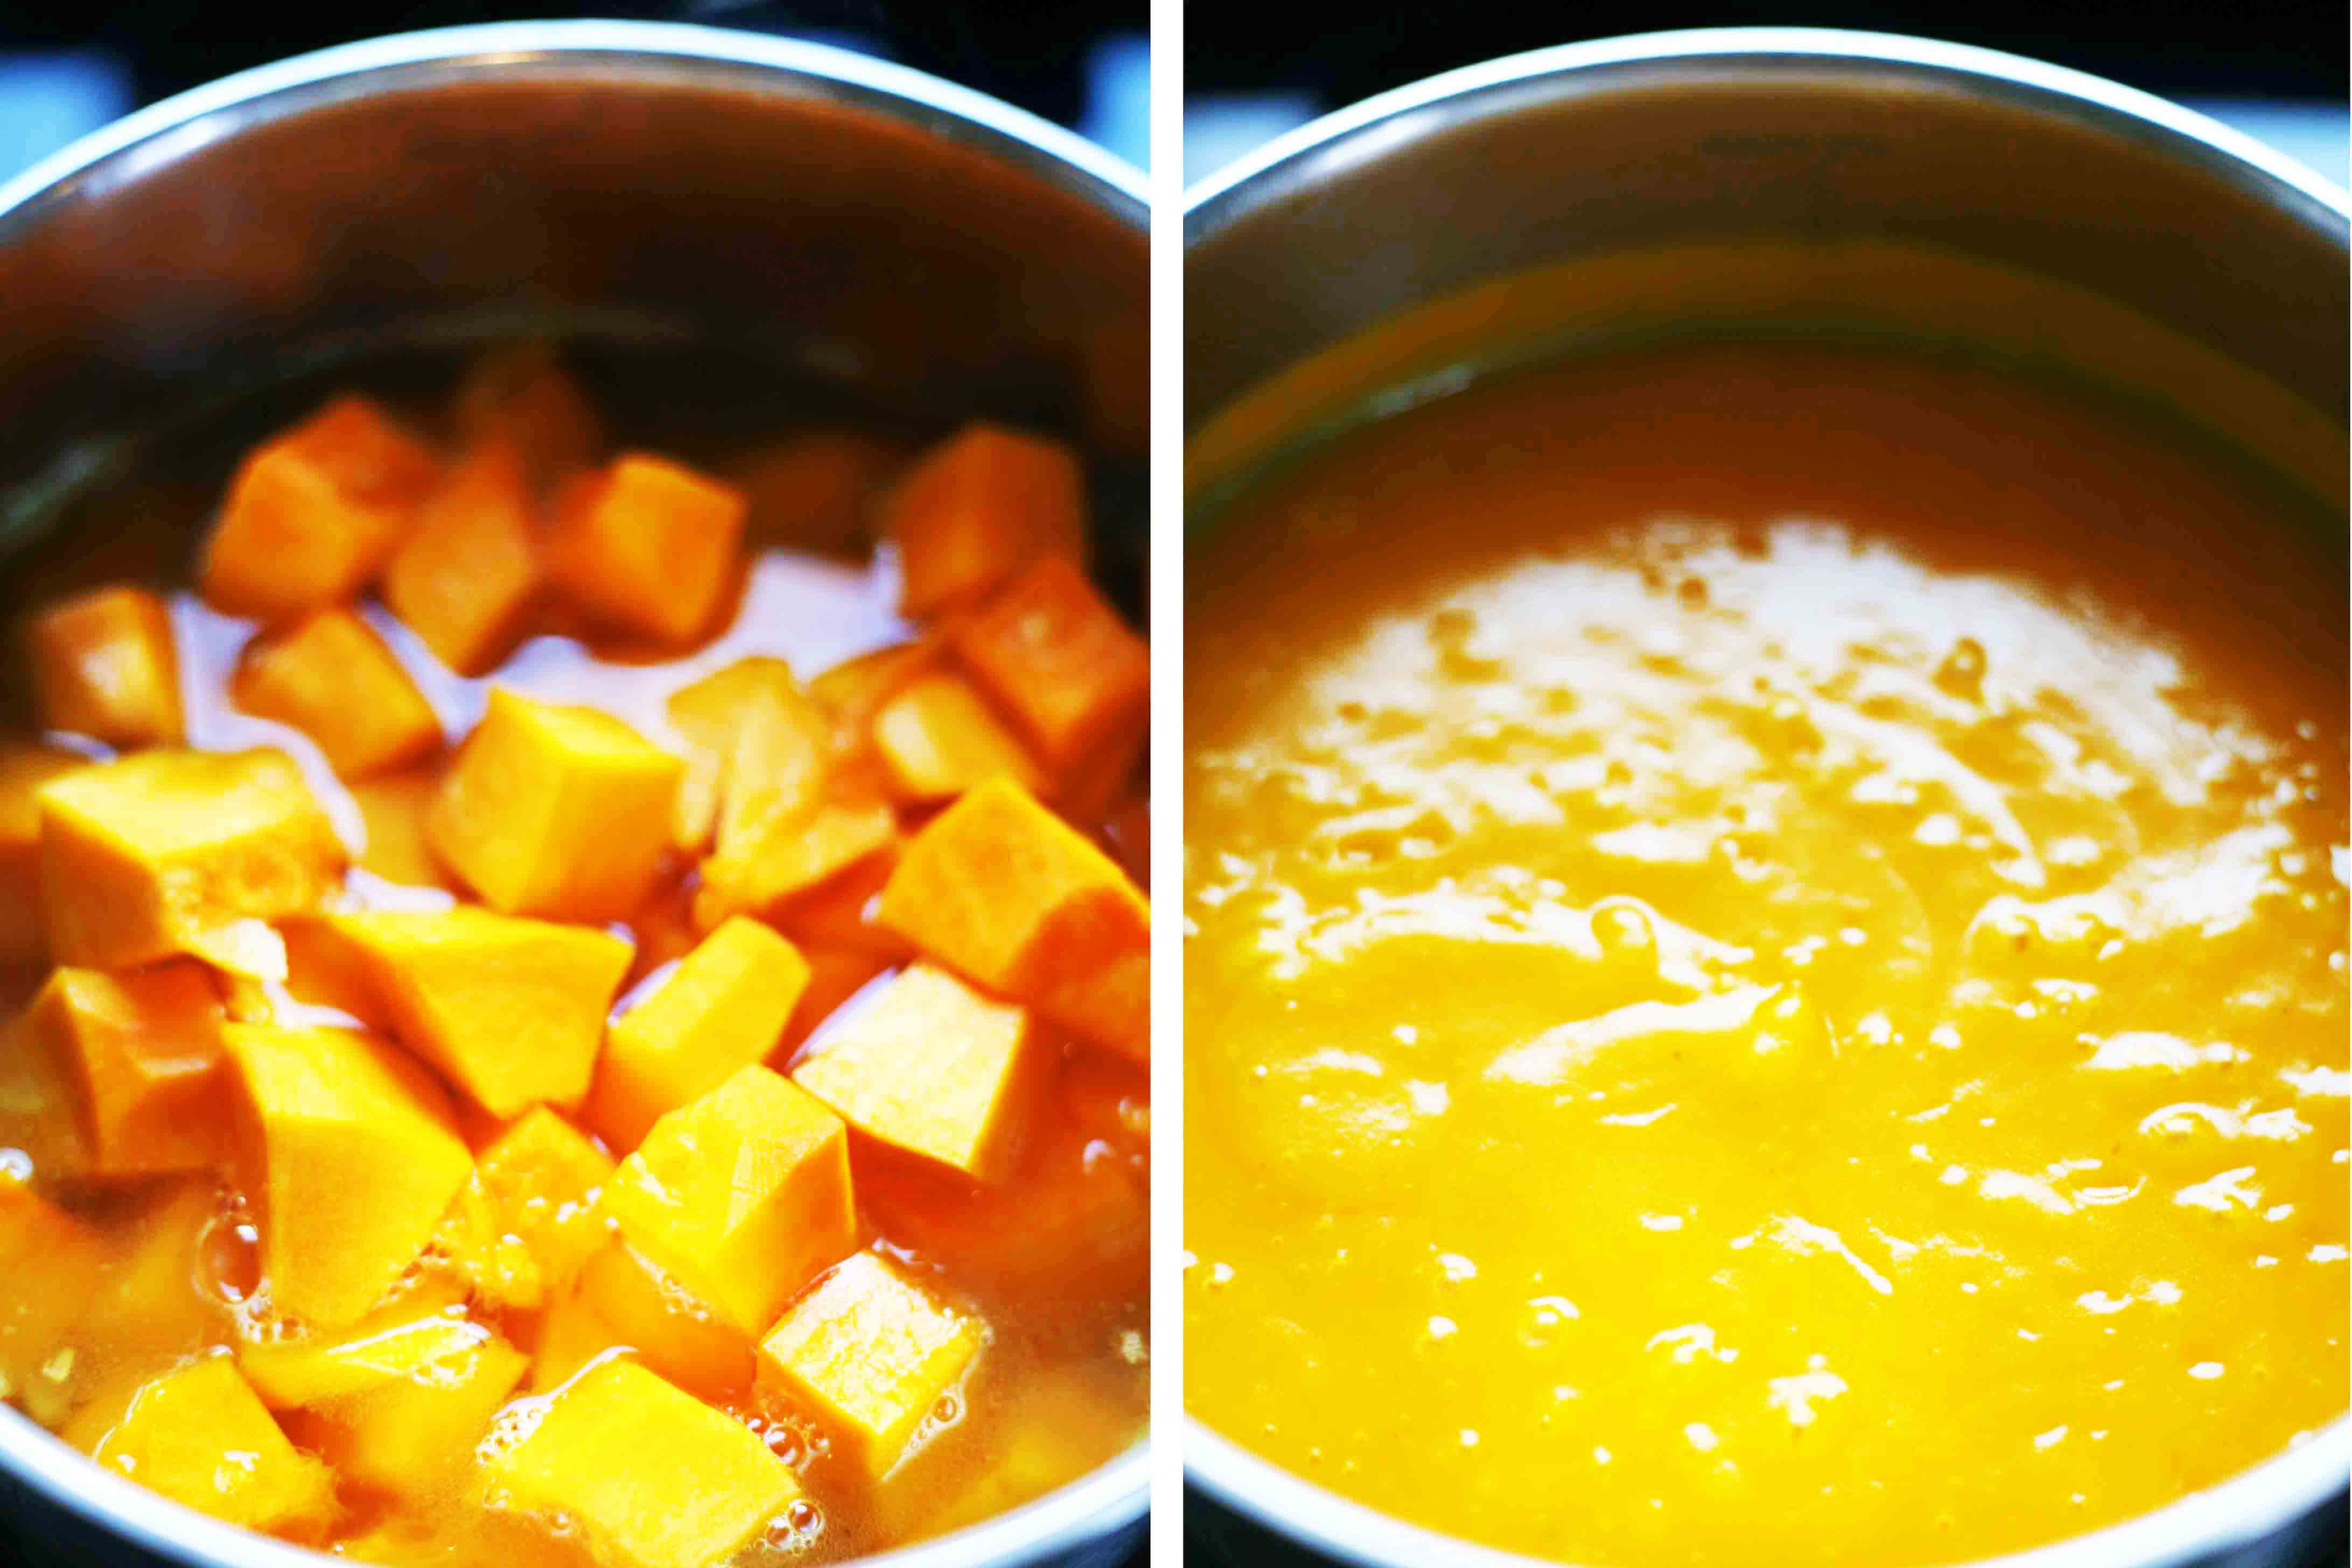 2 photo collage with a stockpot from above showing the cooked pumpkins on the first and an orange cream soup on the second. 